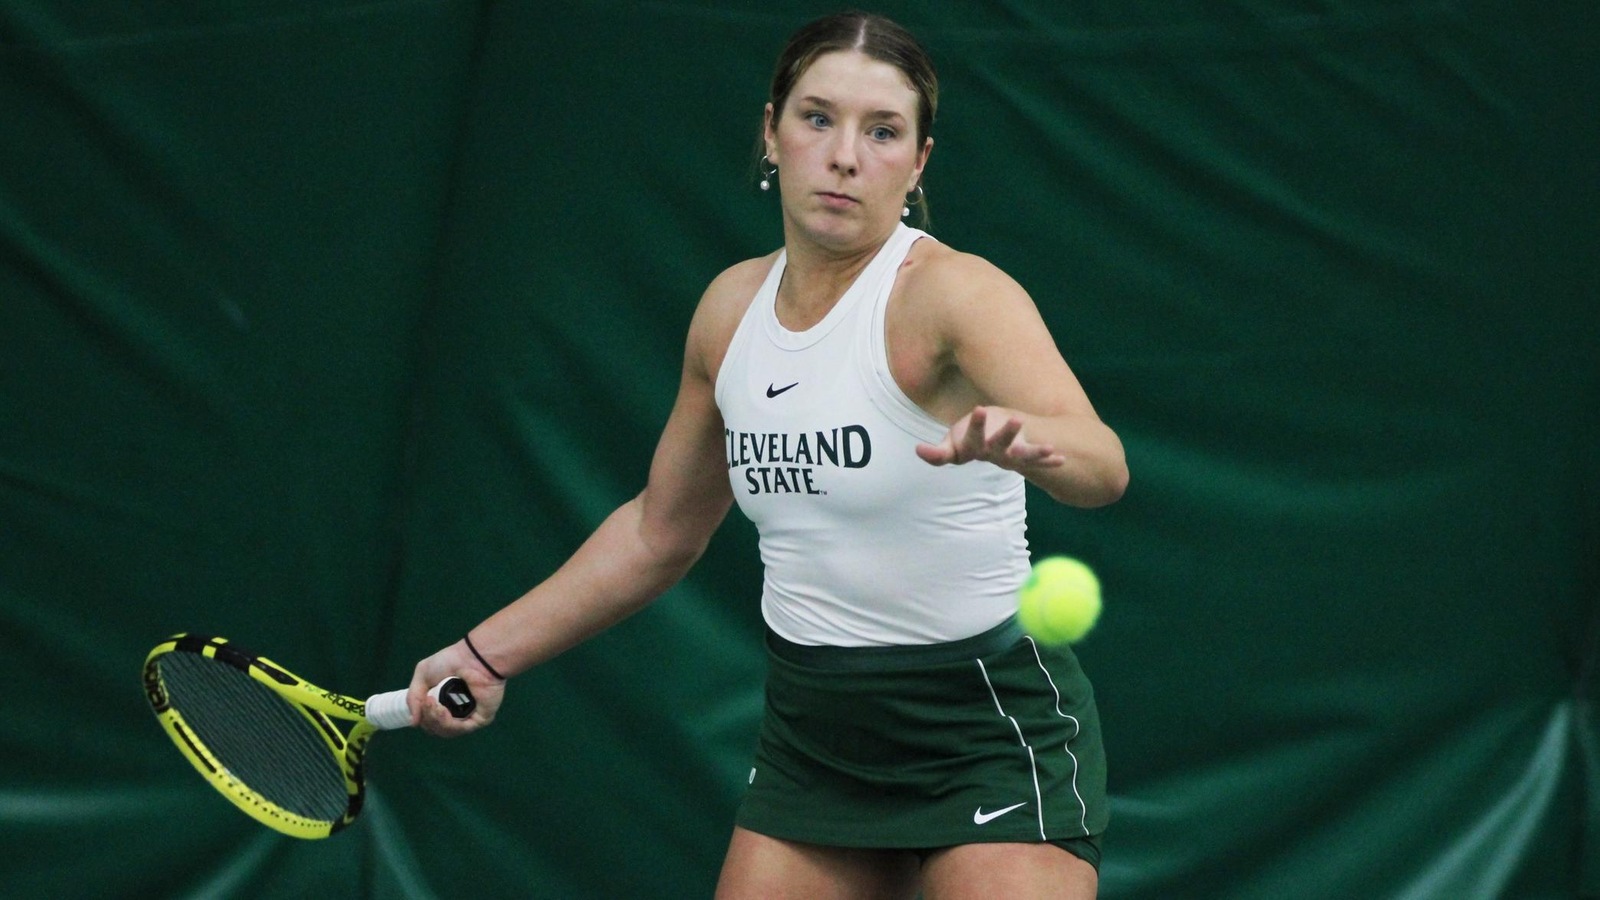 Cleveland State Women’s Tennis Continues Spring Slate Against Ball State & Western Michigan